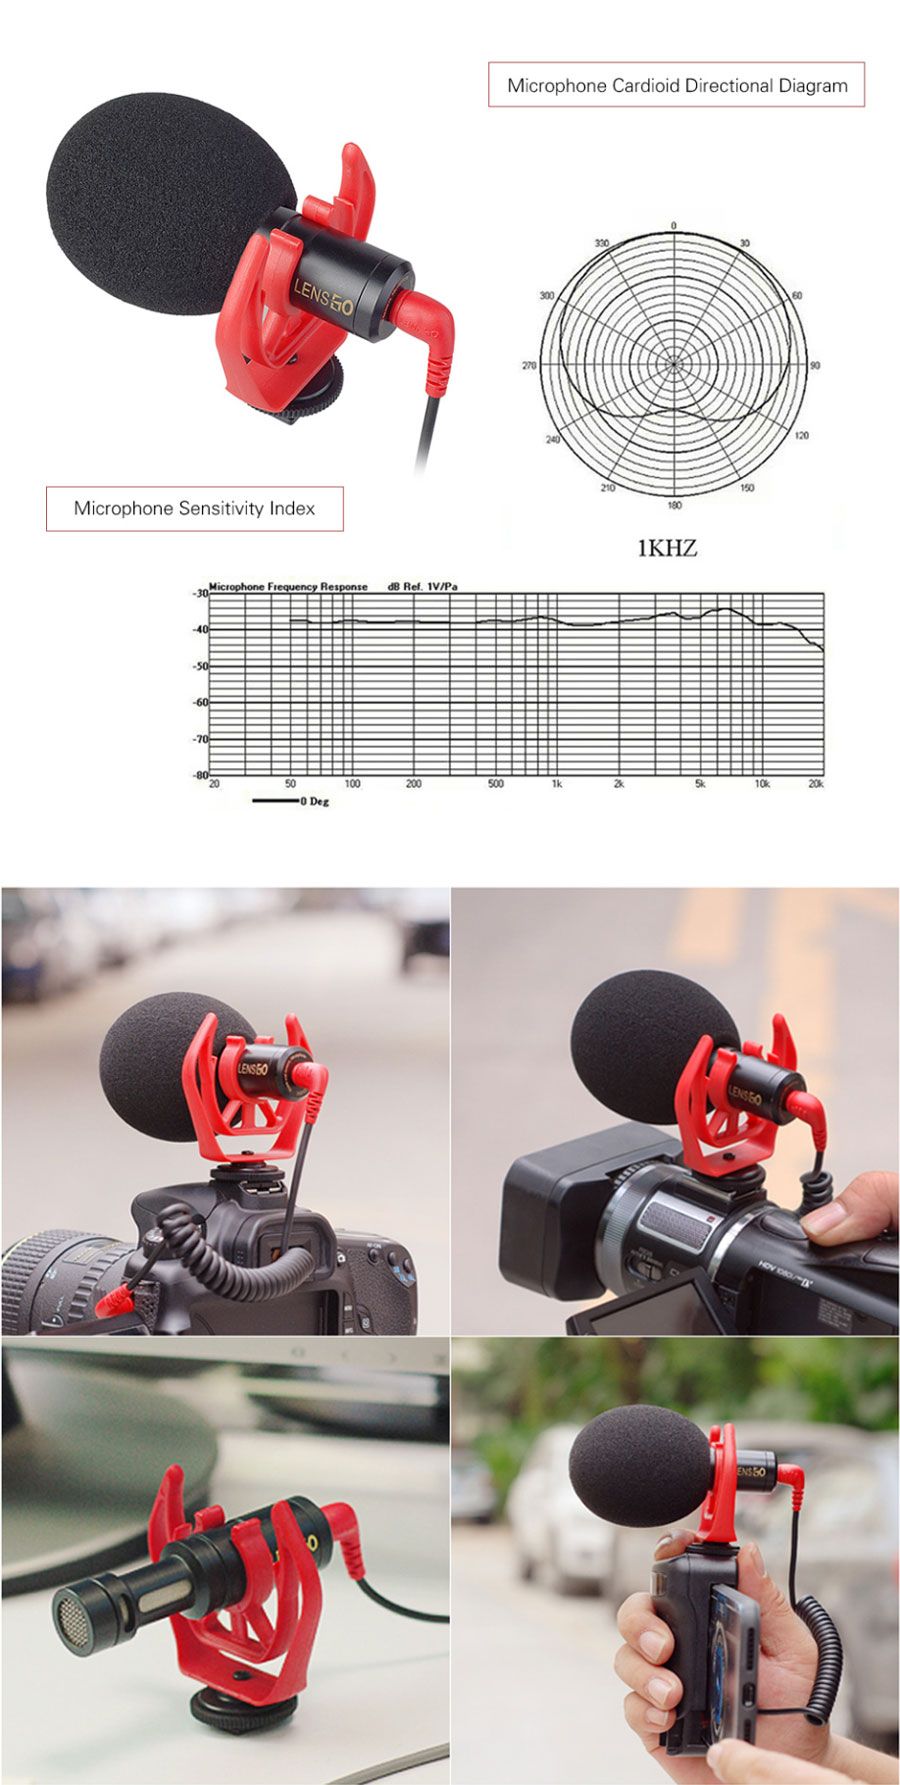 LENSGO-DMM1-35mm-Universal-Cardioid-Directional-Condenser-Microphone-With-Sponge-Windshield-1465277